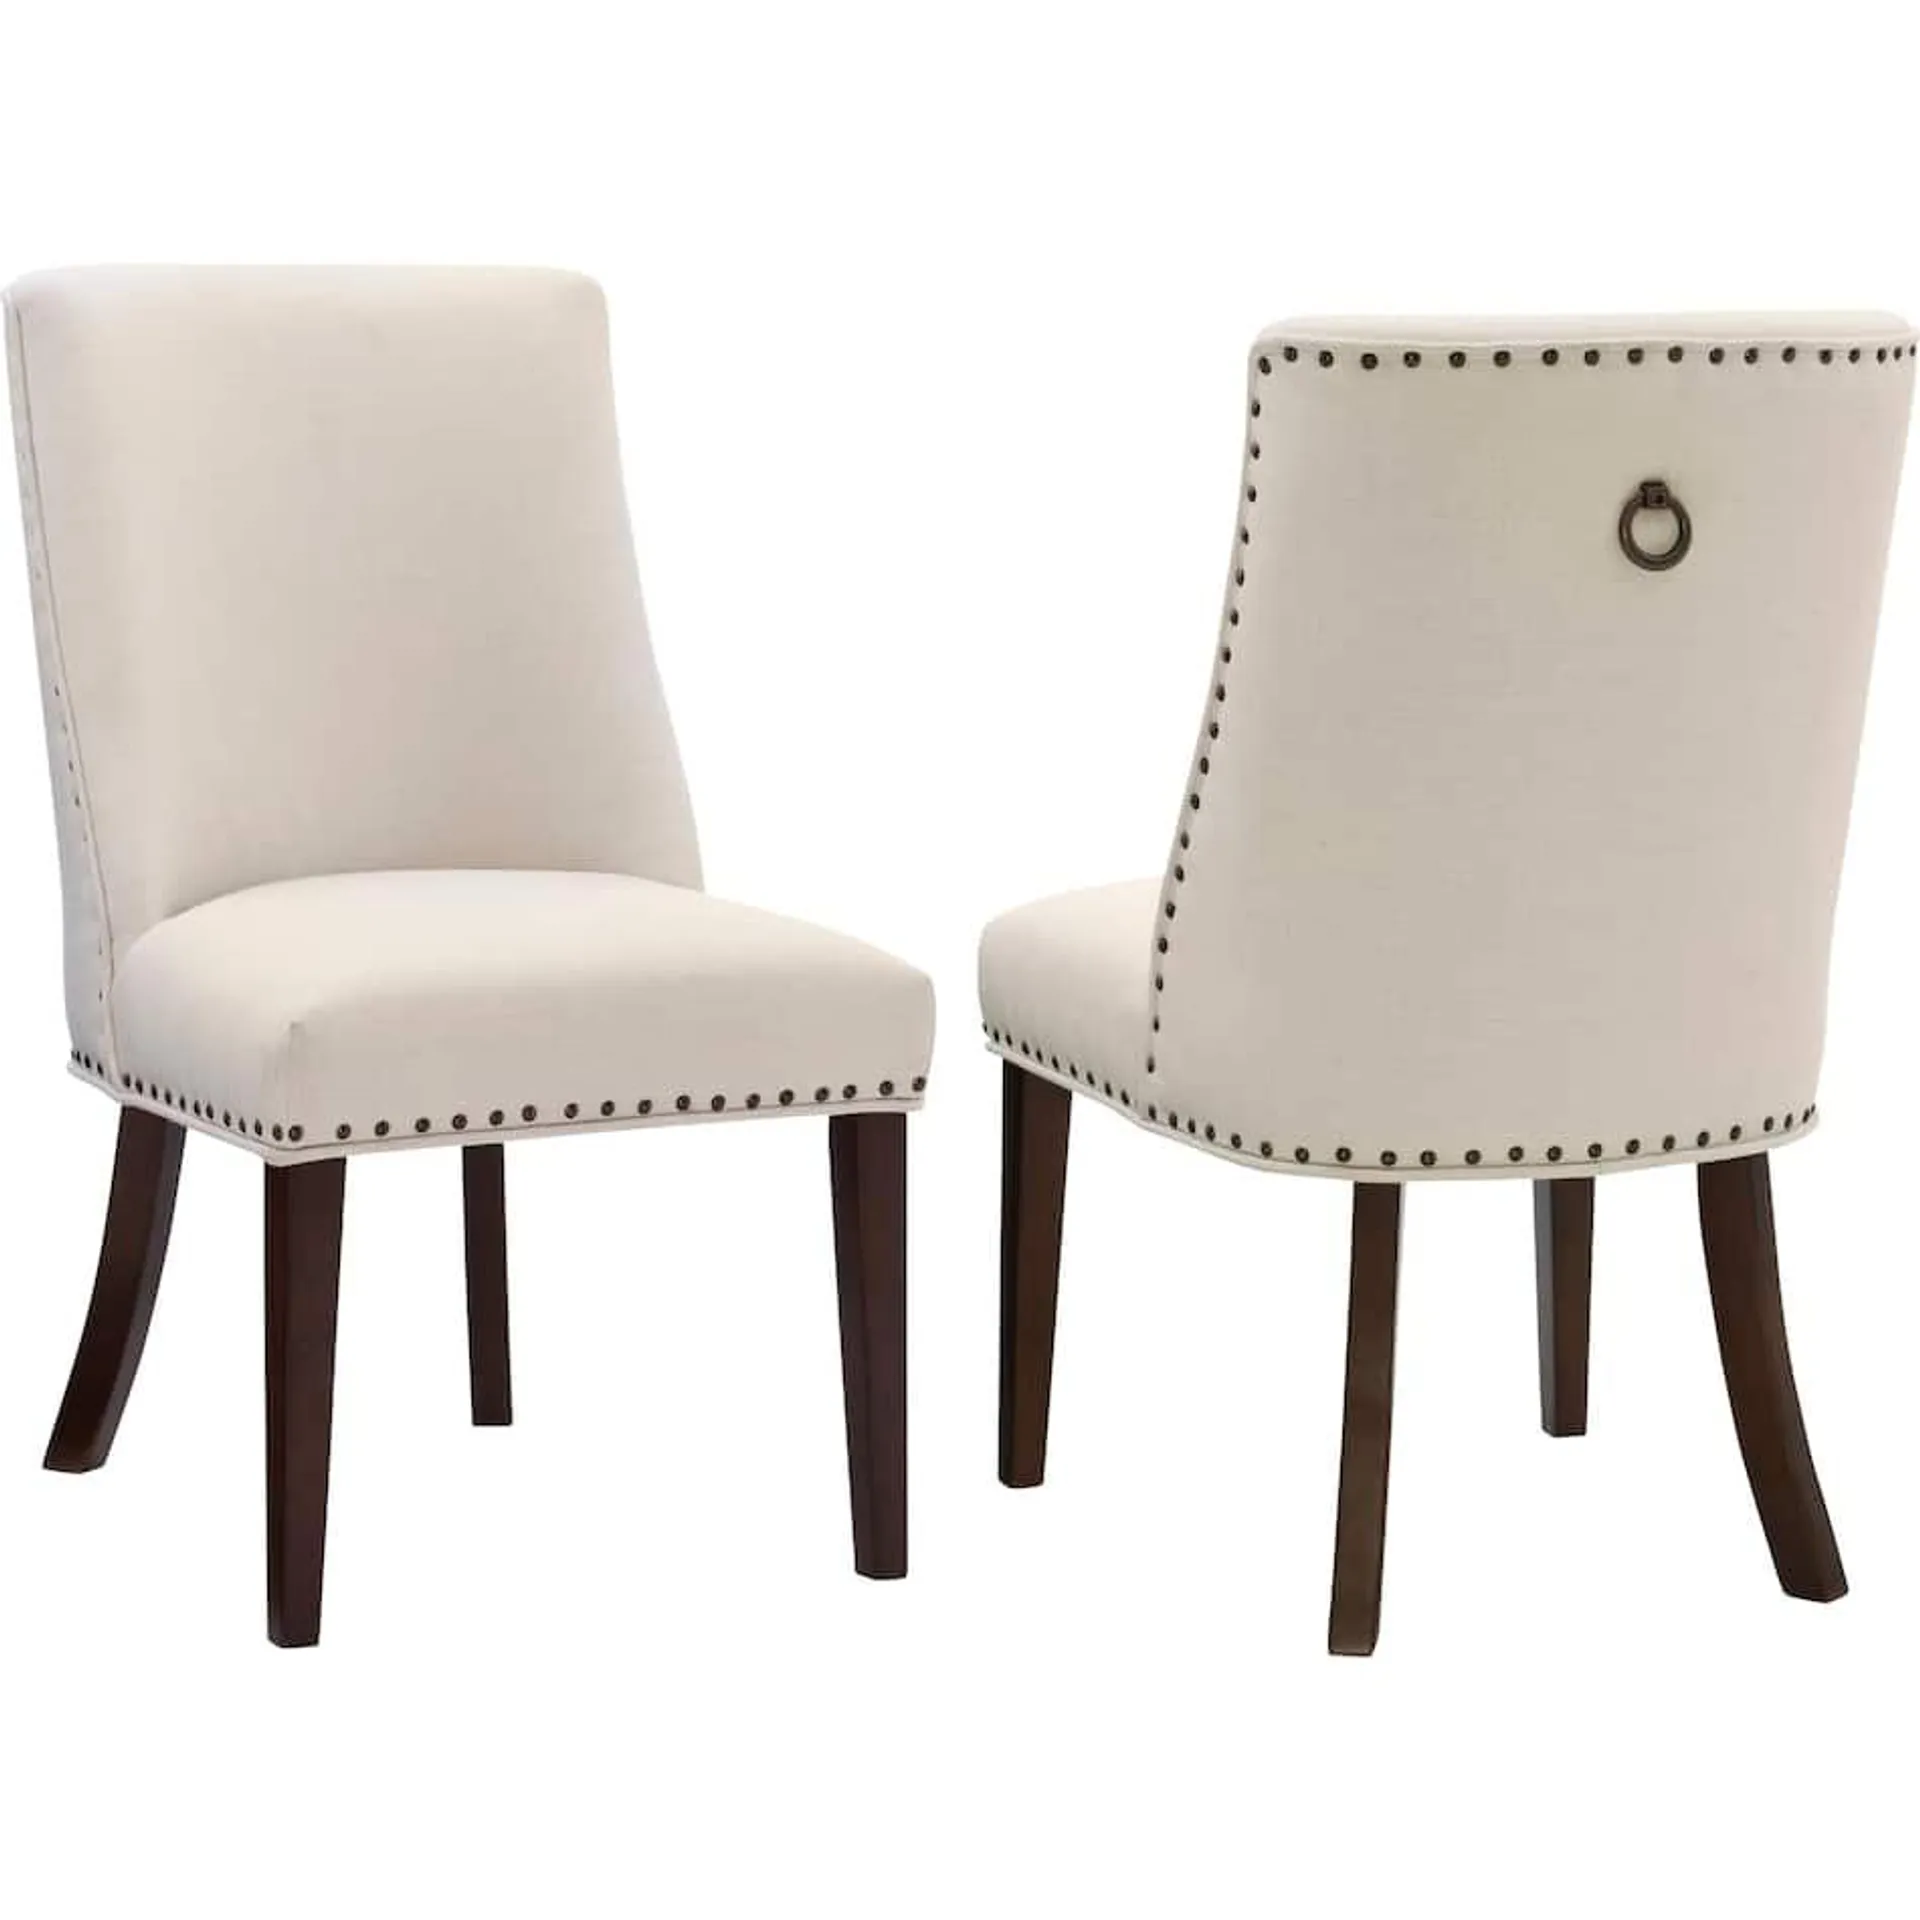 Whitaker Set of 2 Dining Chairs